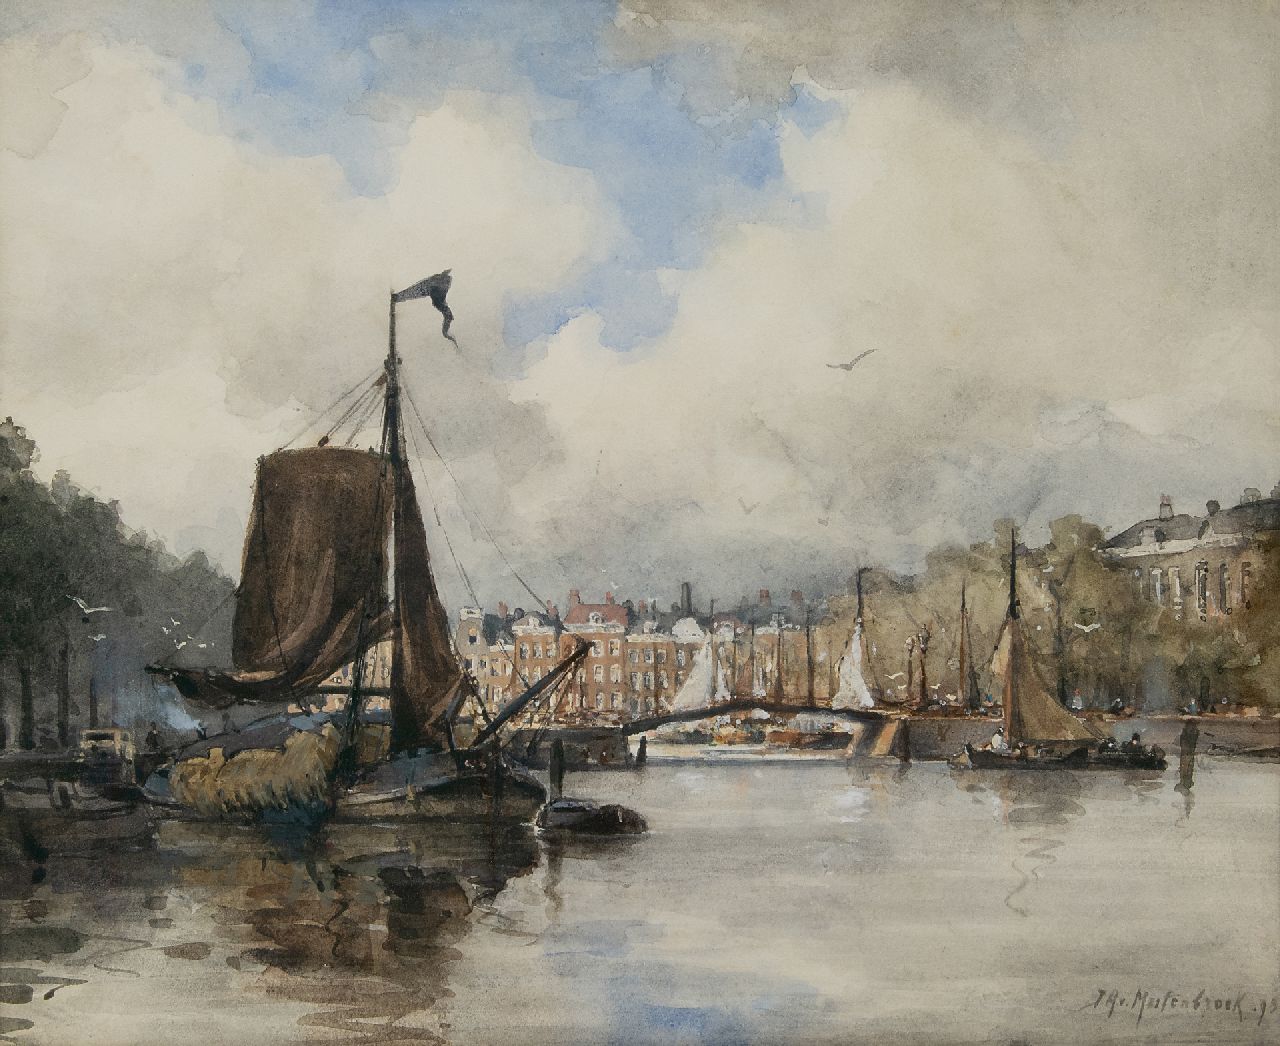 Mastenbroek J.H. van | Johan Hendrik van Mastenbroek | Watercolours and drawings offered for sale | Harbour in Rotterdam, watercolour on paper 34.4 x 41.3 cm, signed l.r. and dated '93